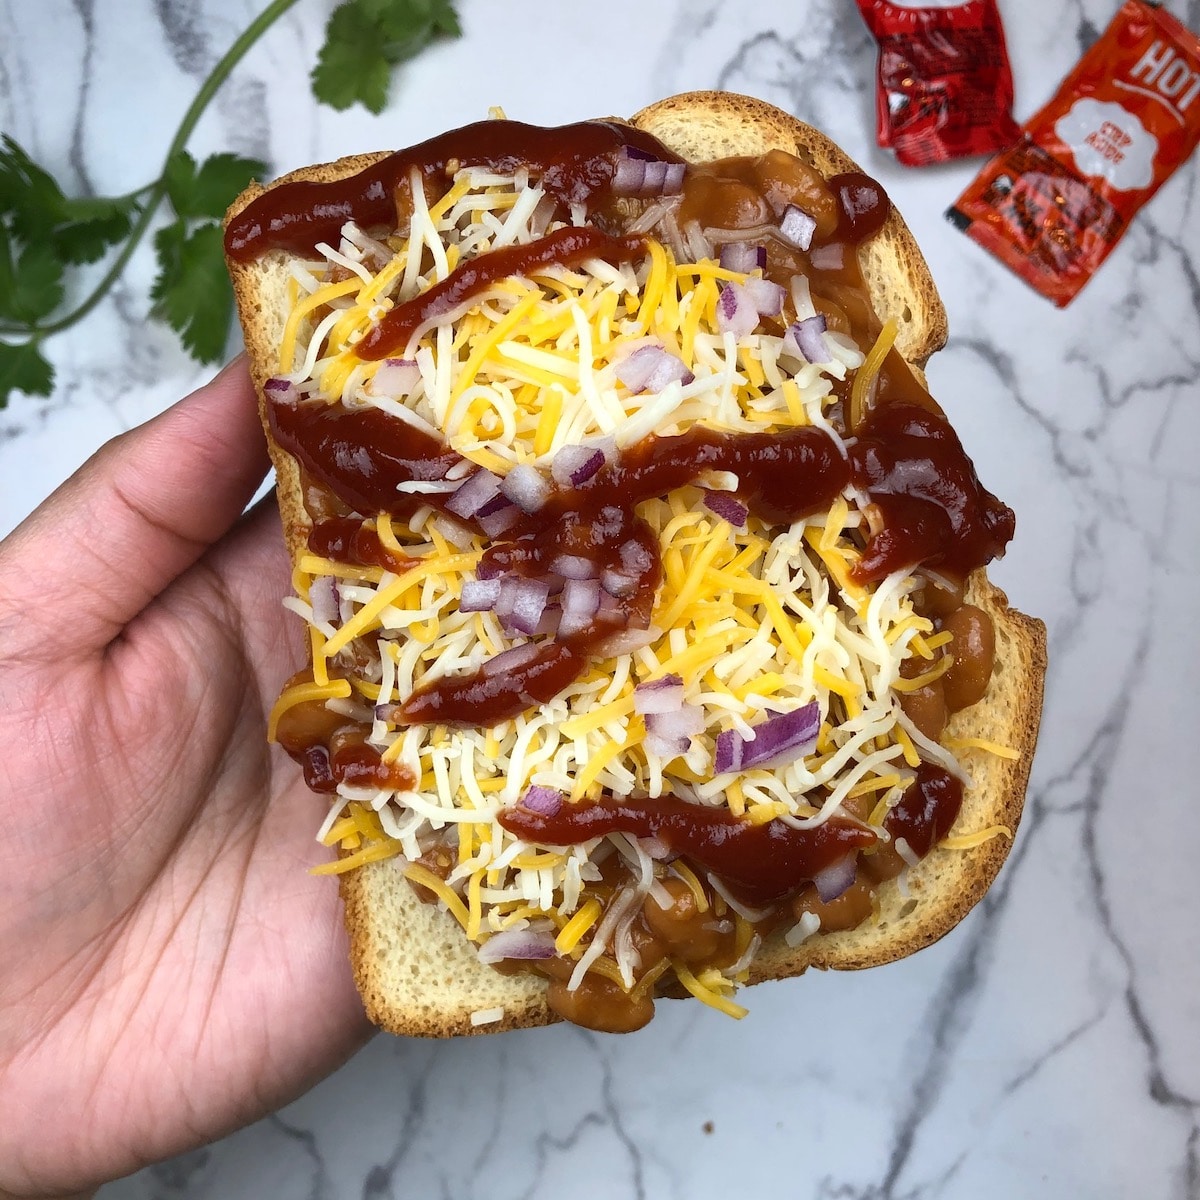 A sliced bread with a layer of baked beans, cheese,and hot sauce